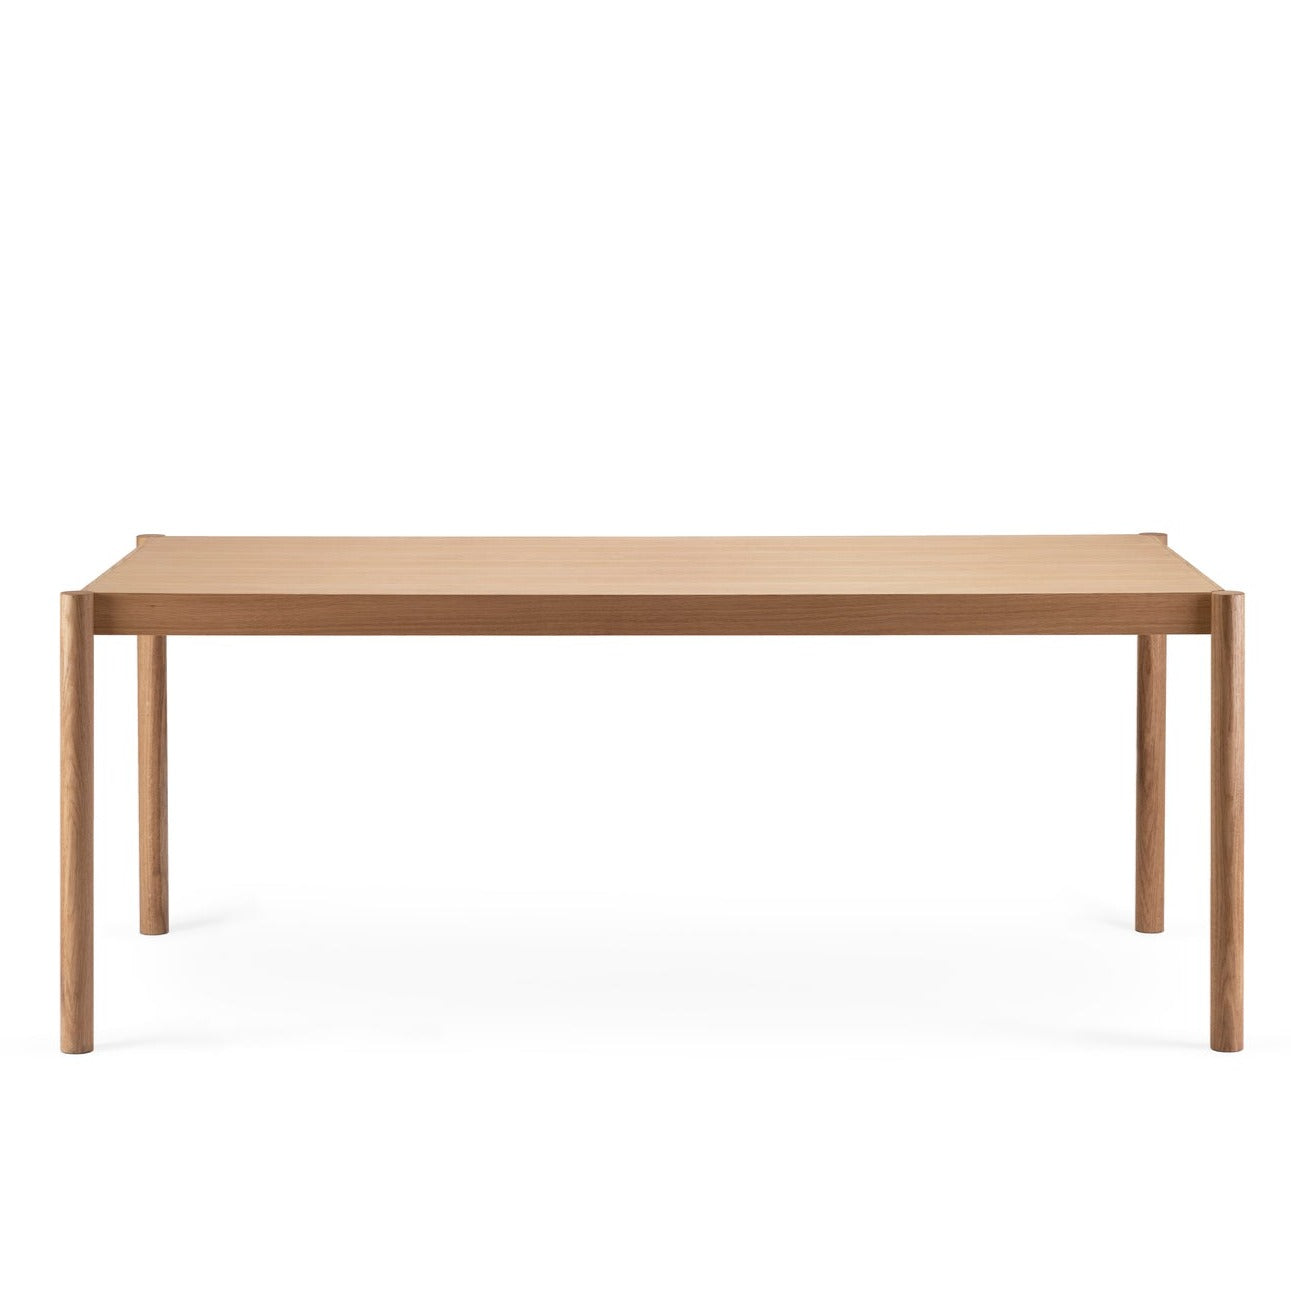 CITIZEN Dining Table-natural oak-large size